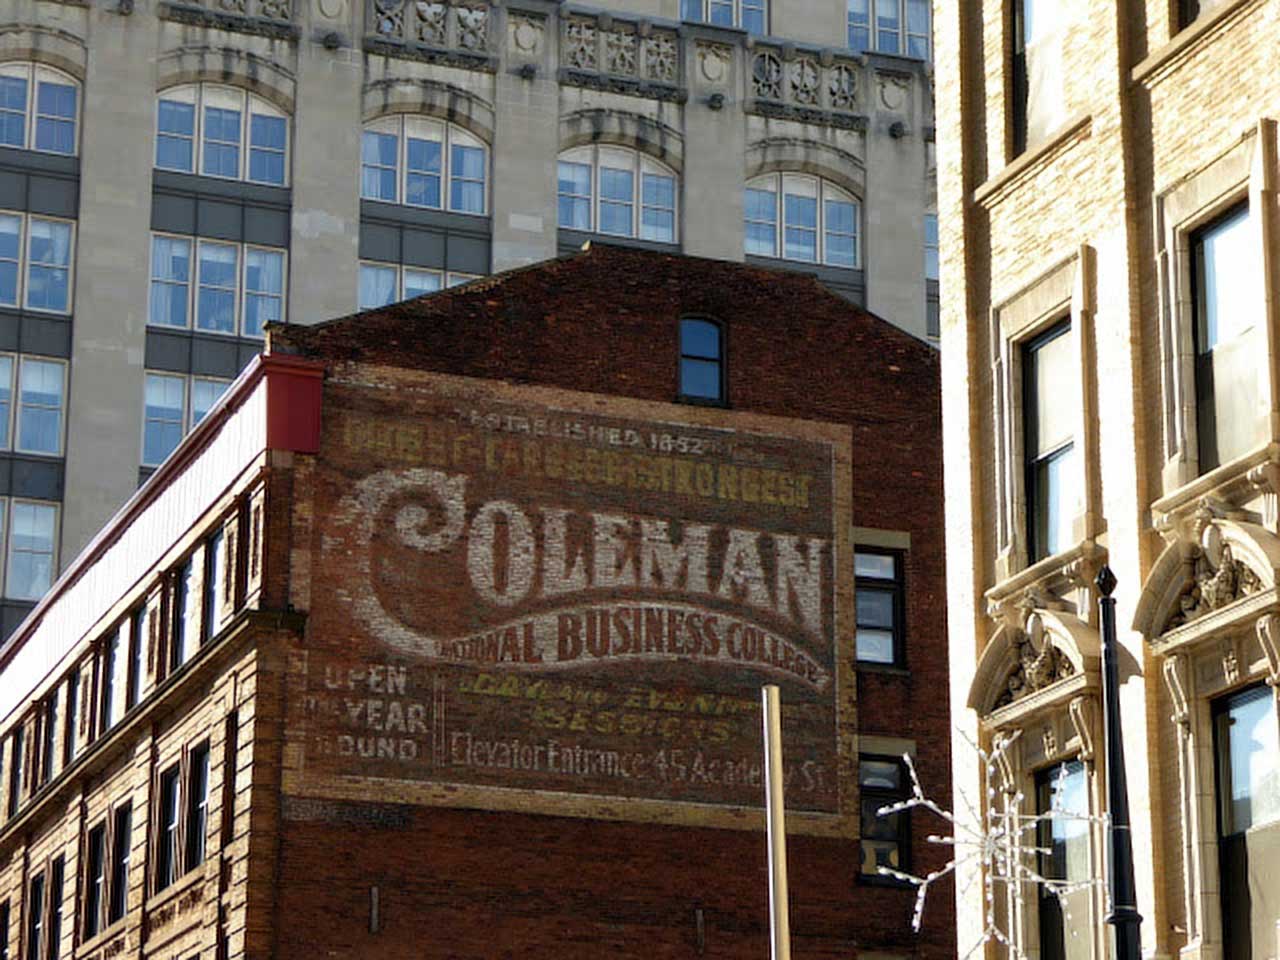 Coleman National Business College newark history sign